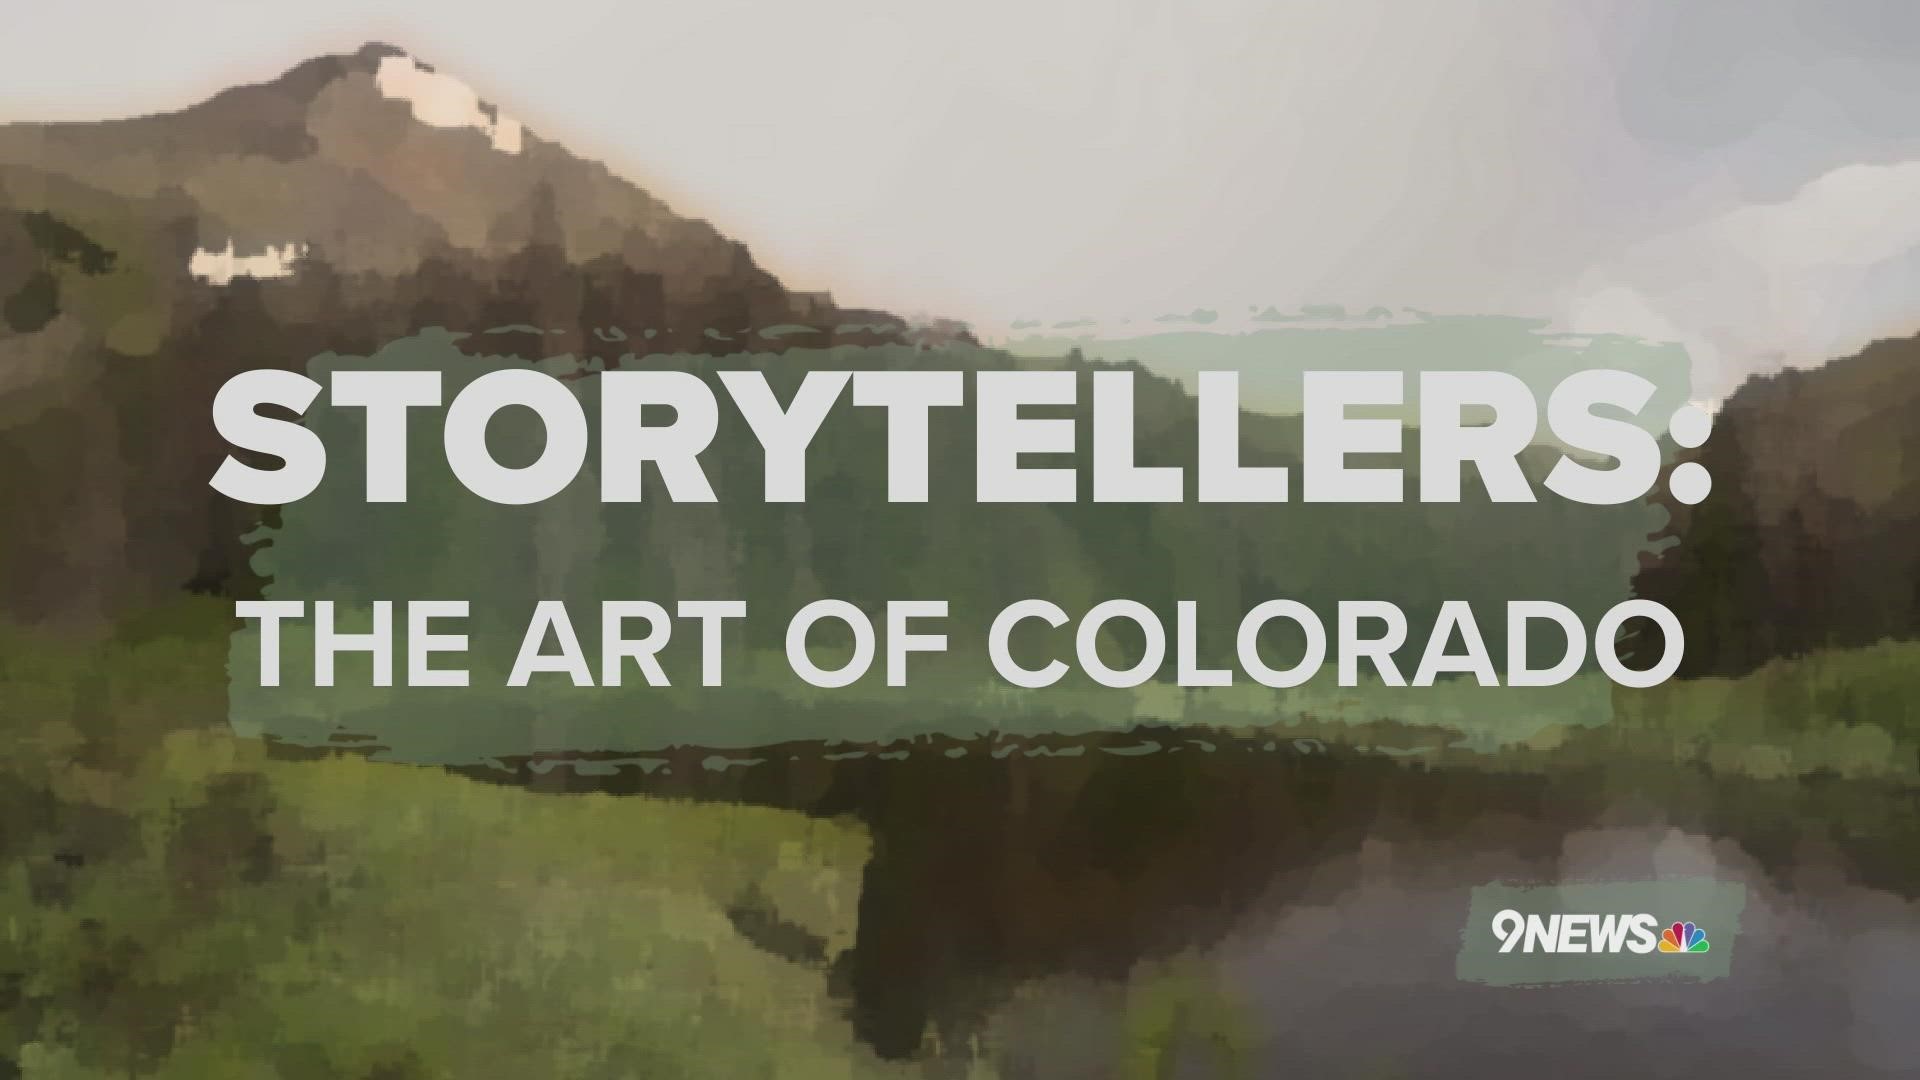 9NEWS showcases the various talents of artists around the state of Colorado.